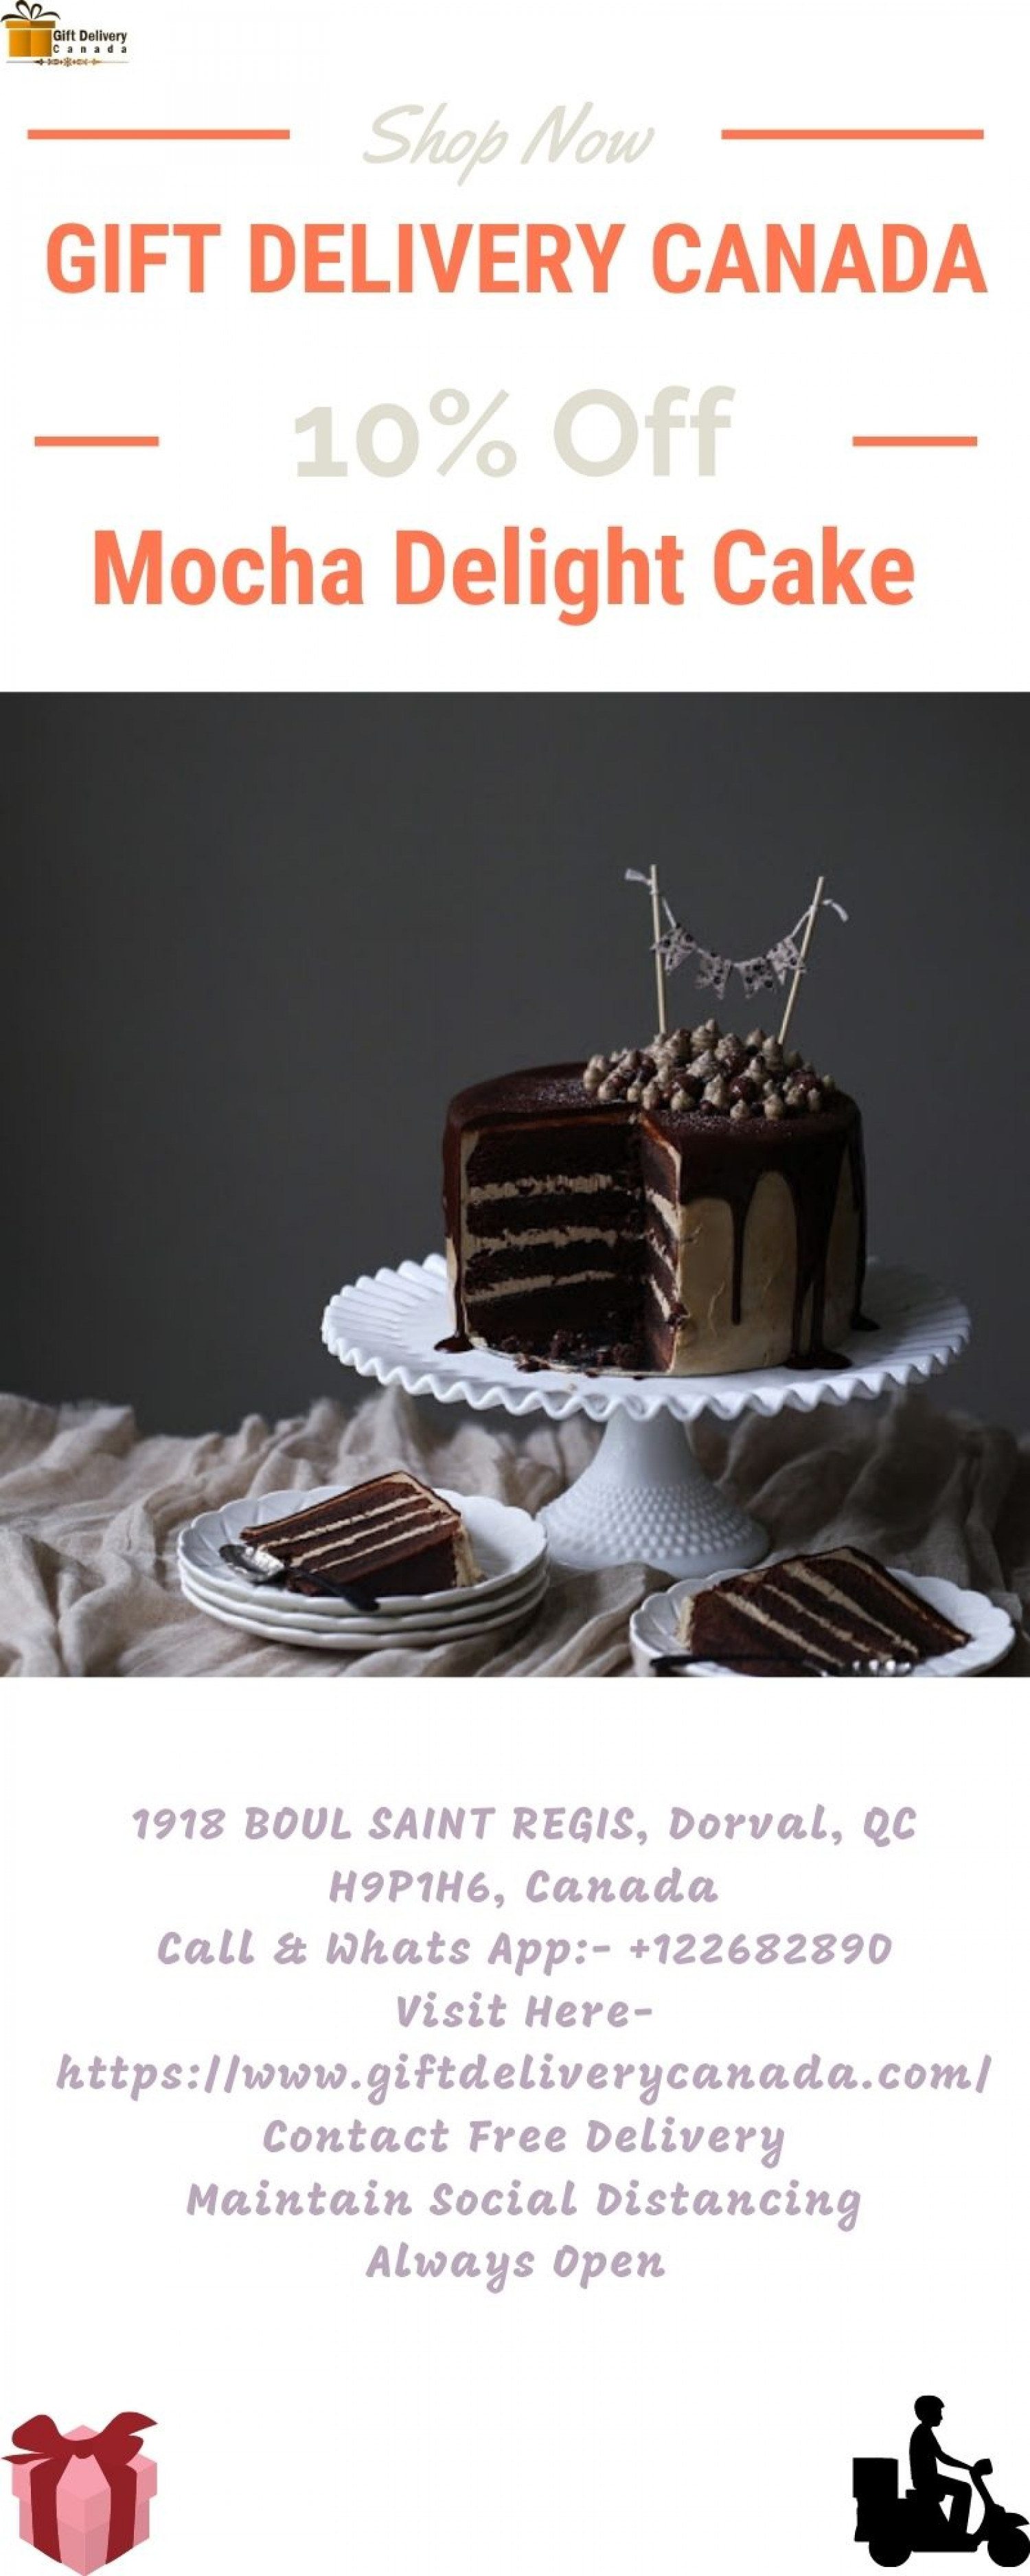  Order Mocha Delight Cake Online to Canada | Gift delivery Canada  Infographic